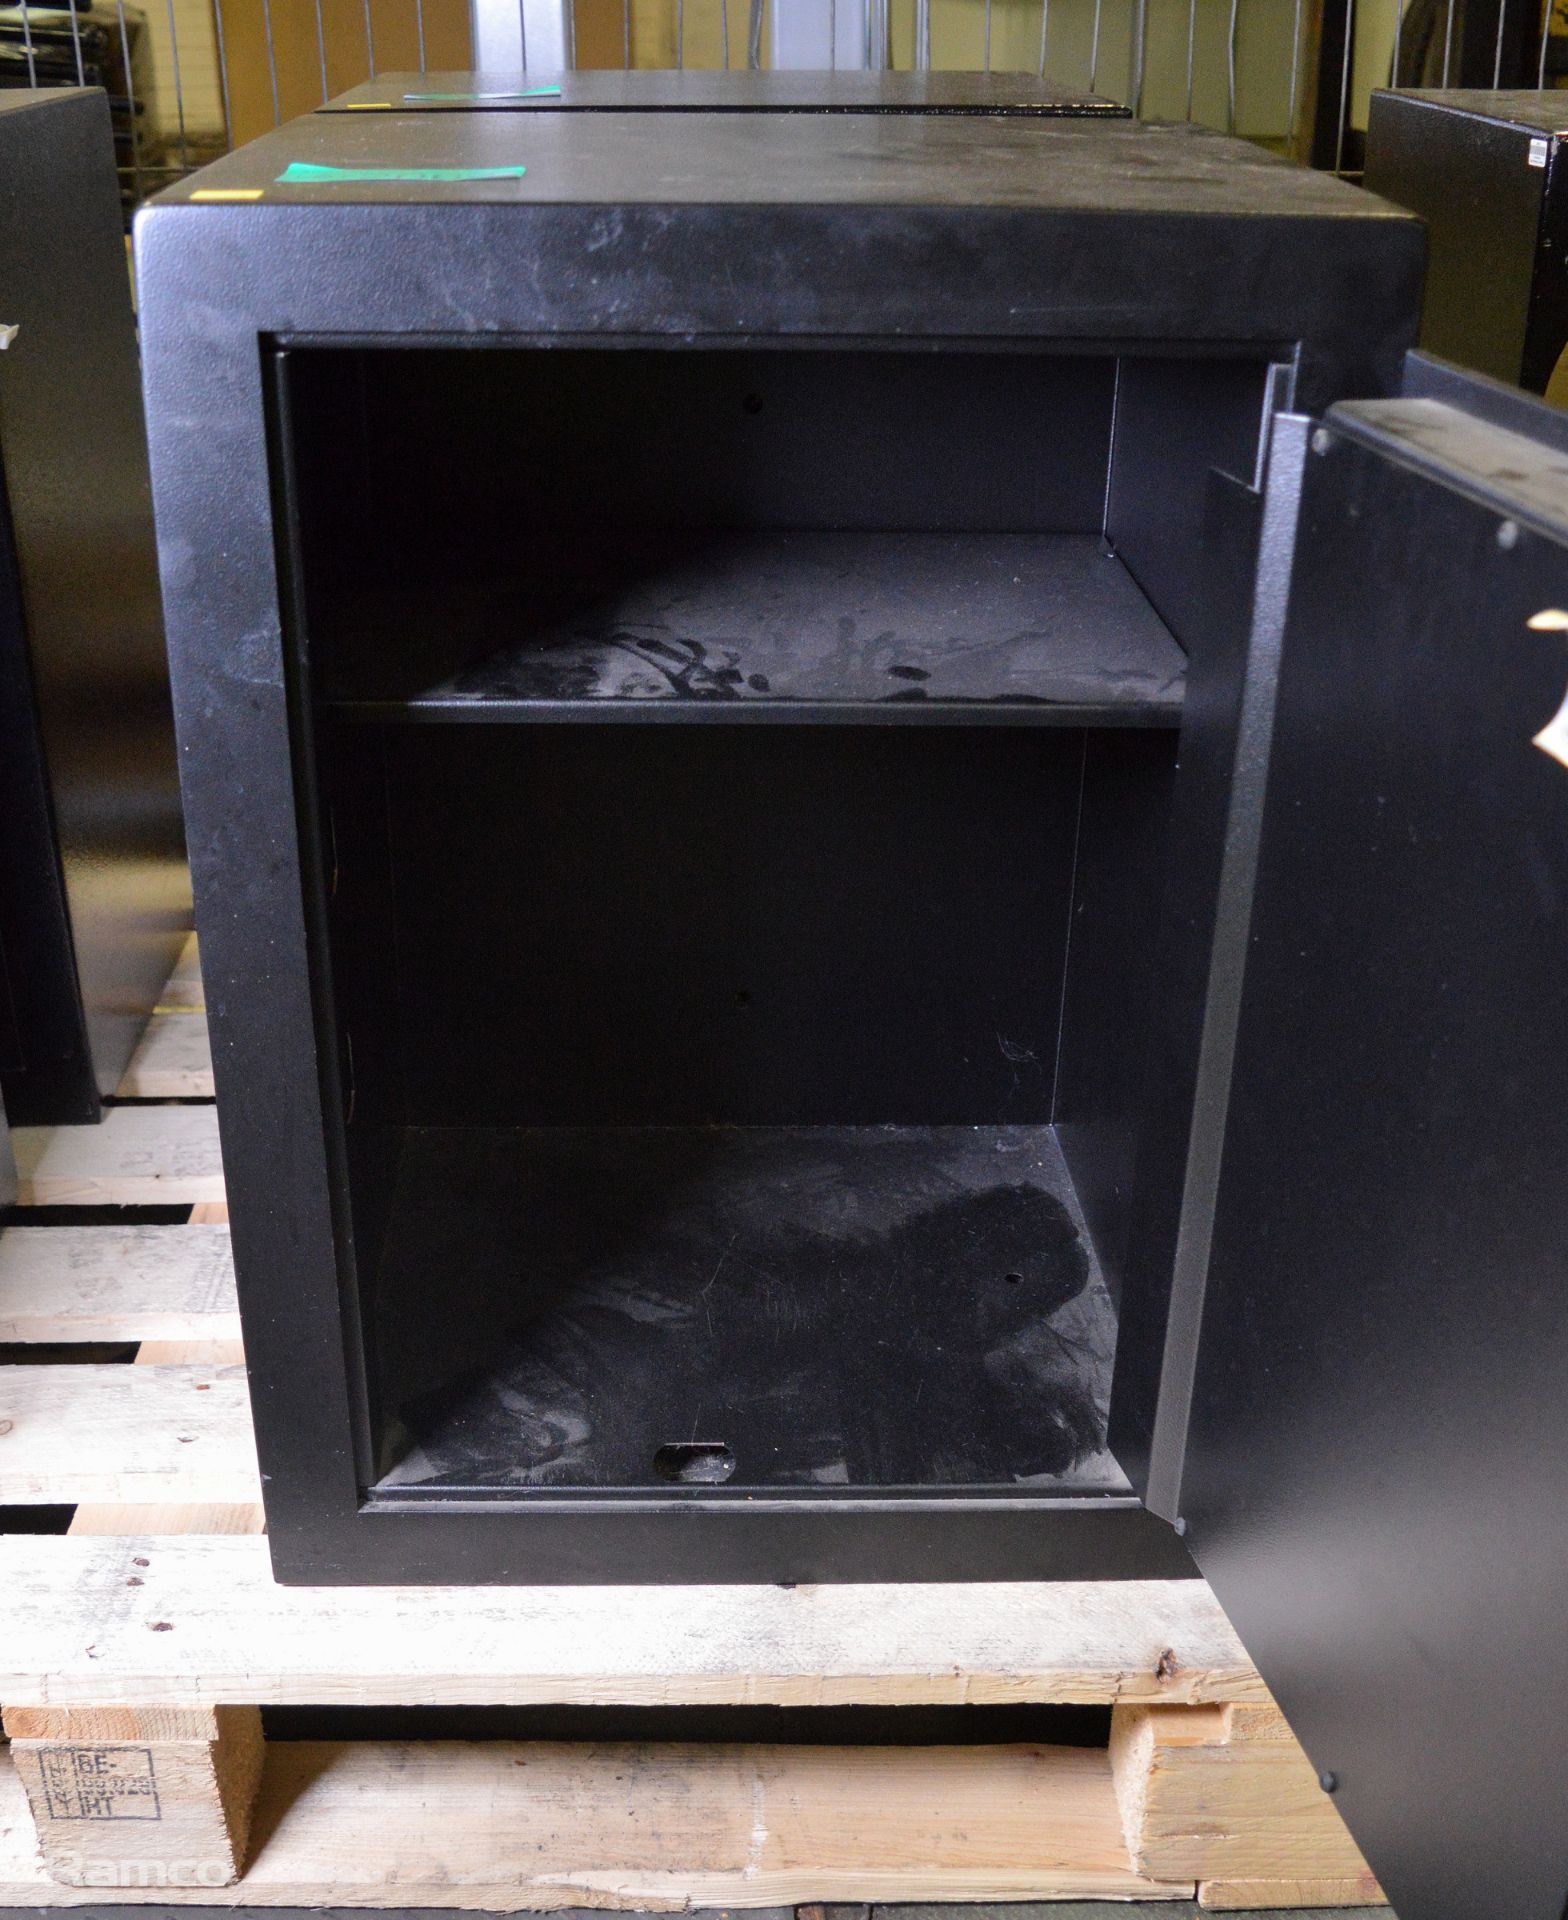 Stahlschrank PT-3 Small Combination Safe L 450mm x W 410mmx H 600mm - combination unknown - Image 3 of 4